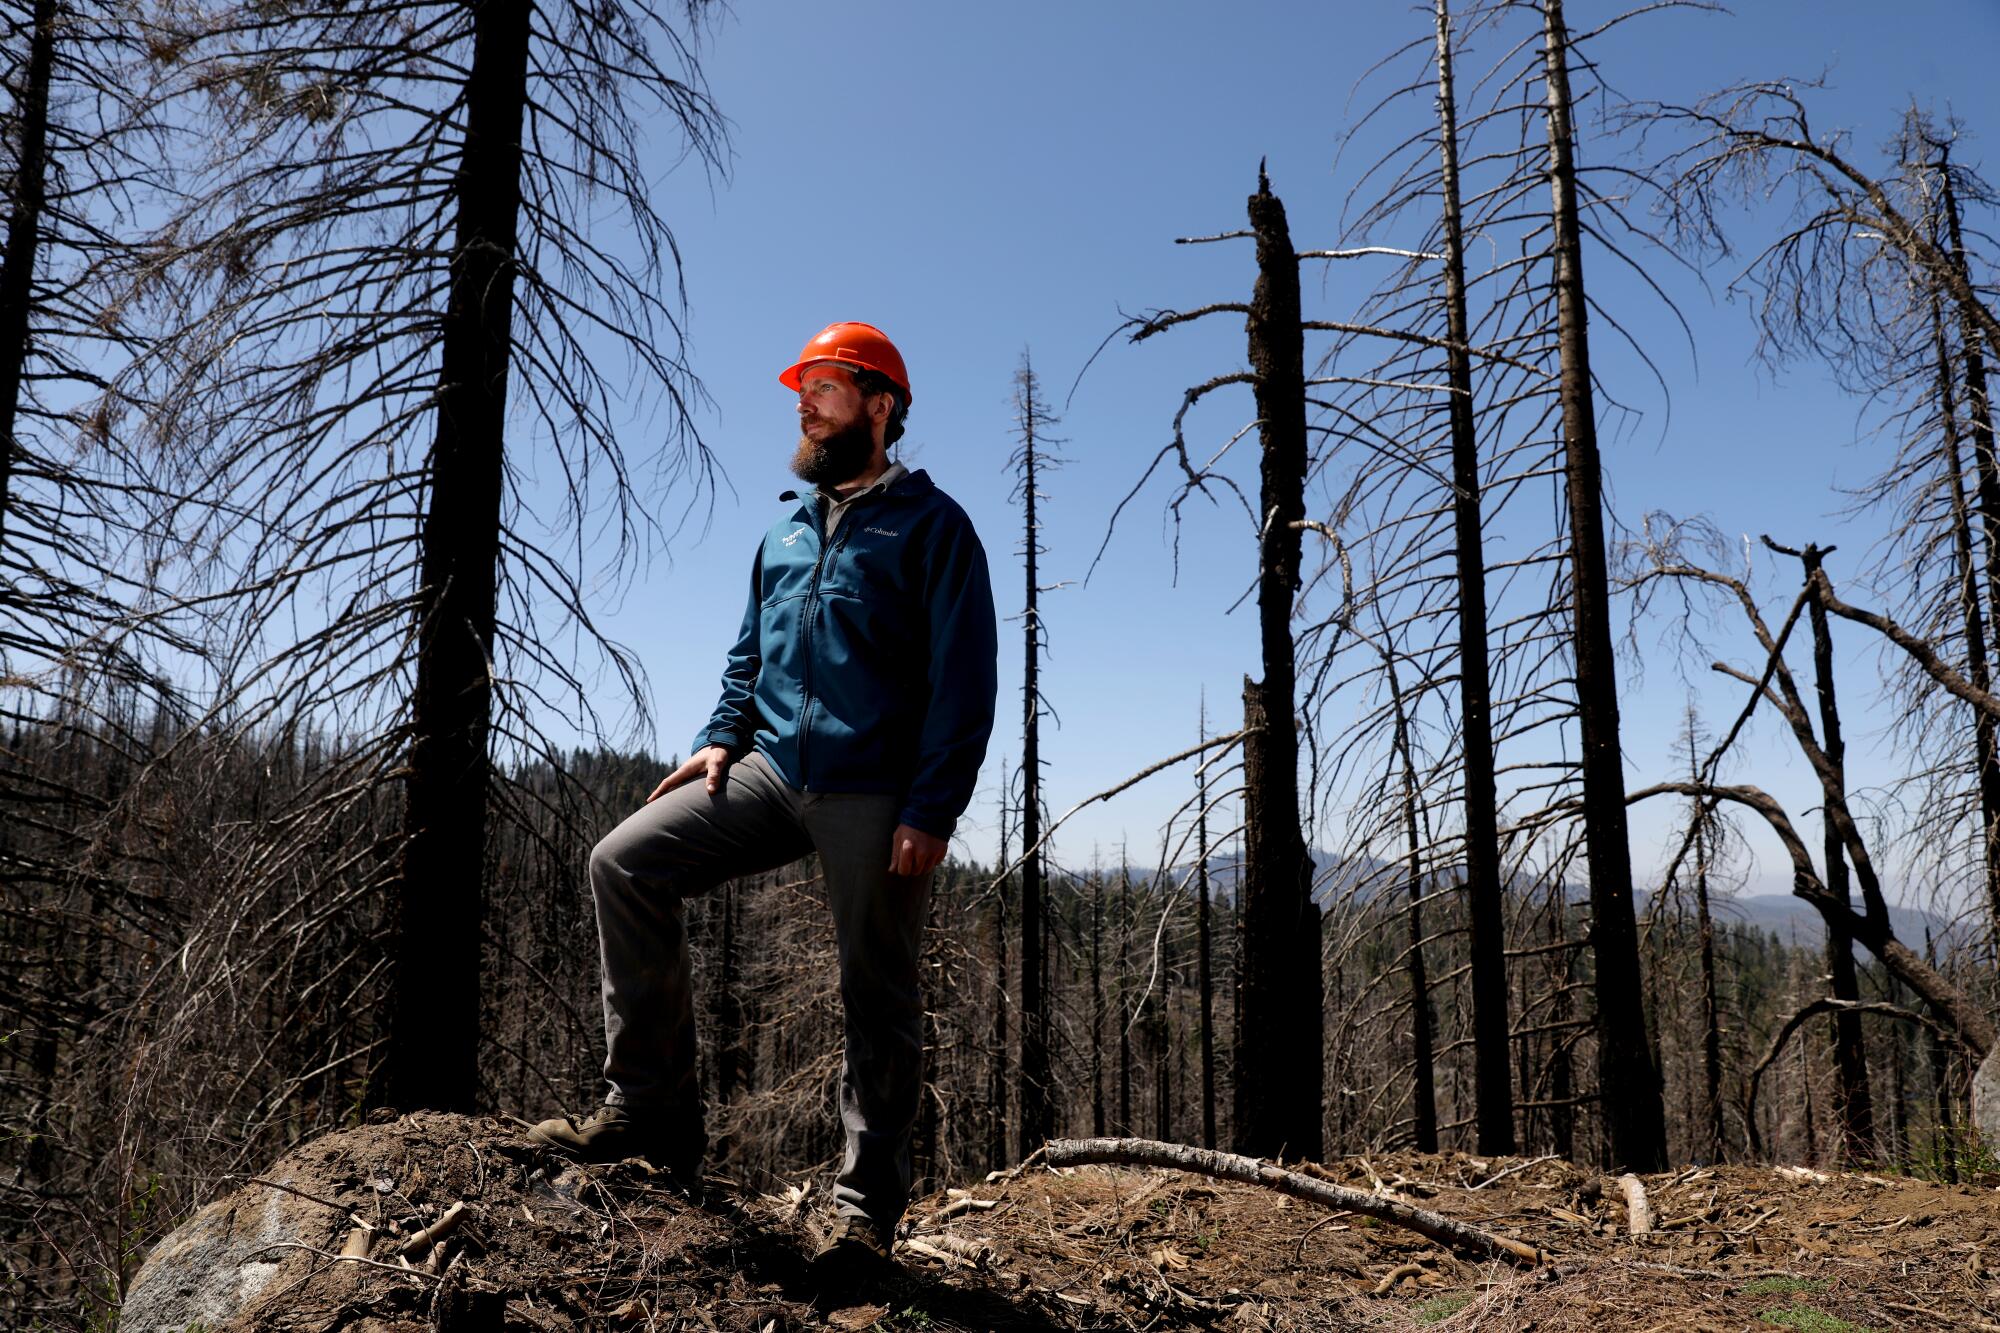 A bearded man in a blue jacket and red helmet stands amid numerous dead and fire-scorched trees.